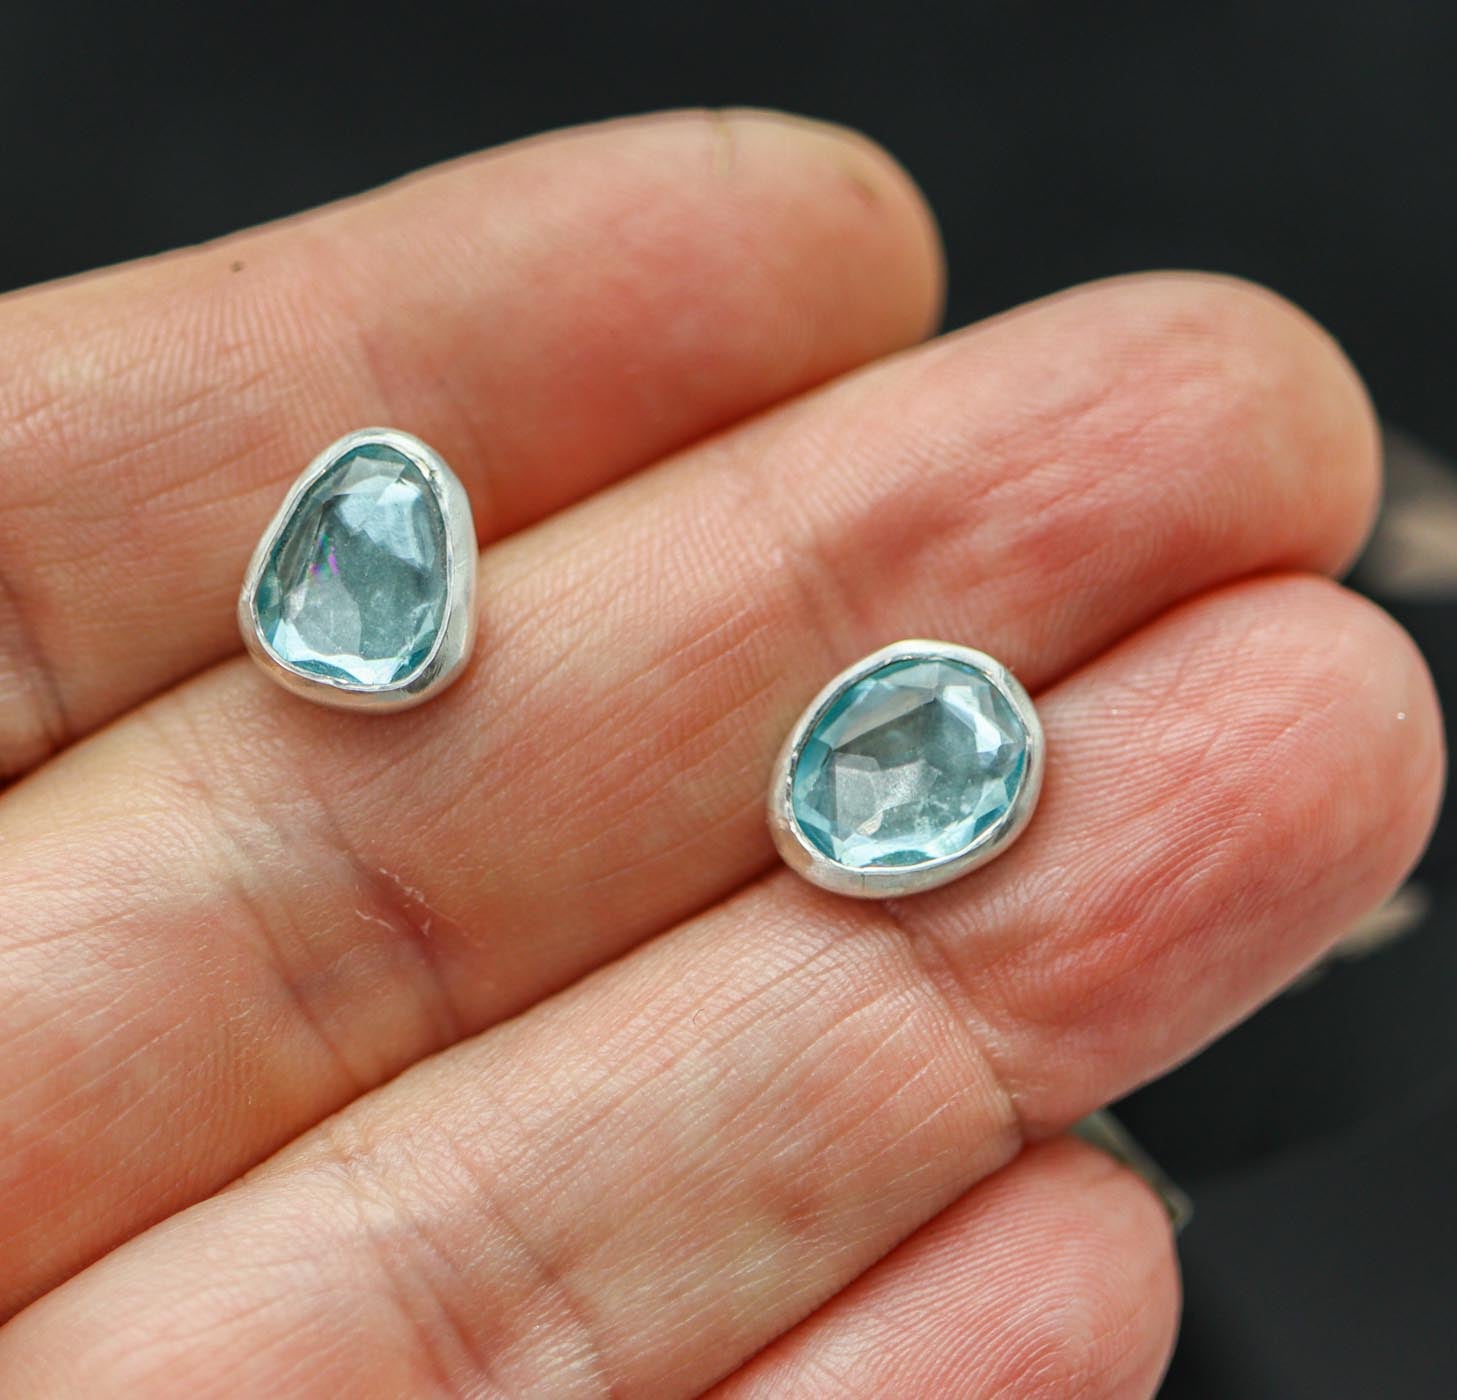 Sparkly Blue Topaz Stud Earrings Sterling Silver